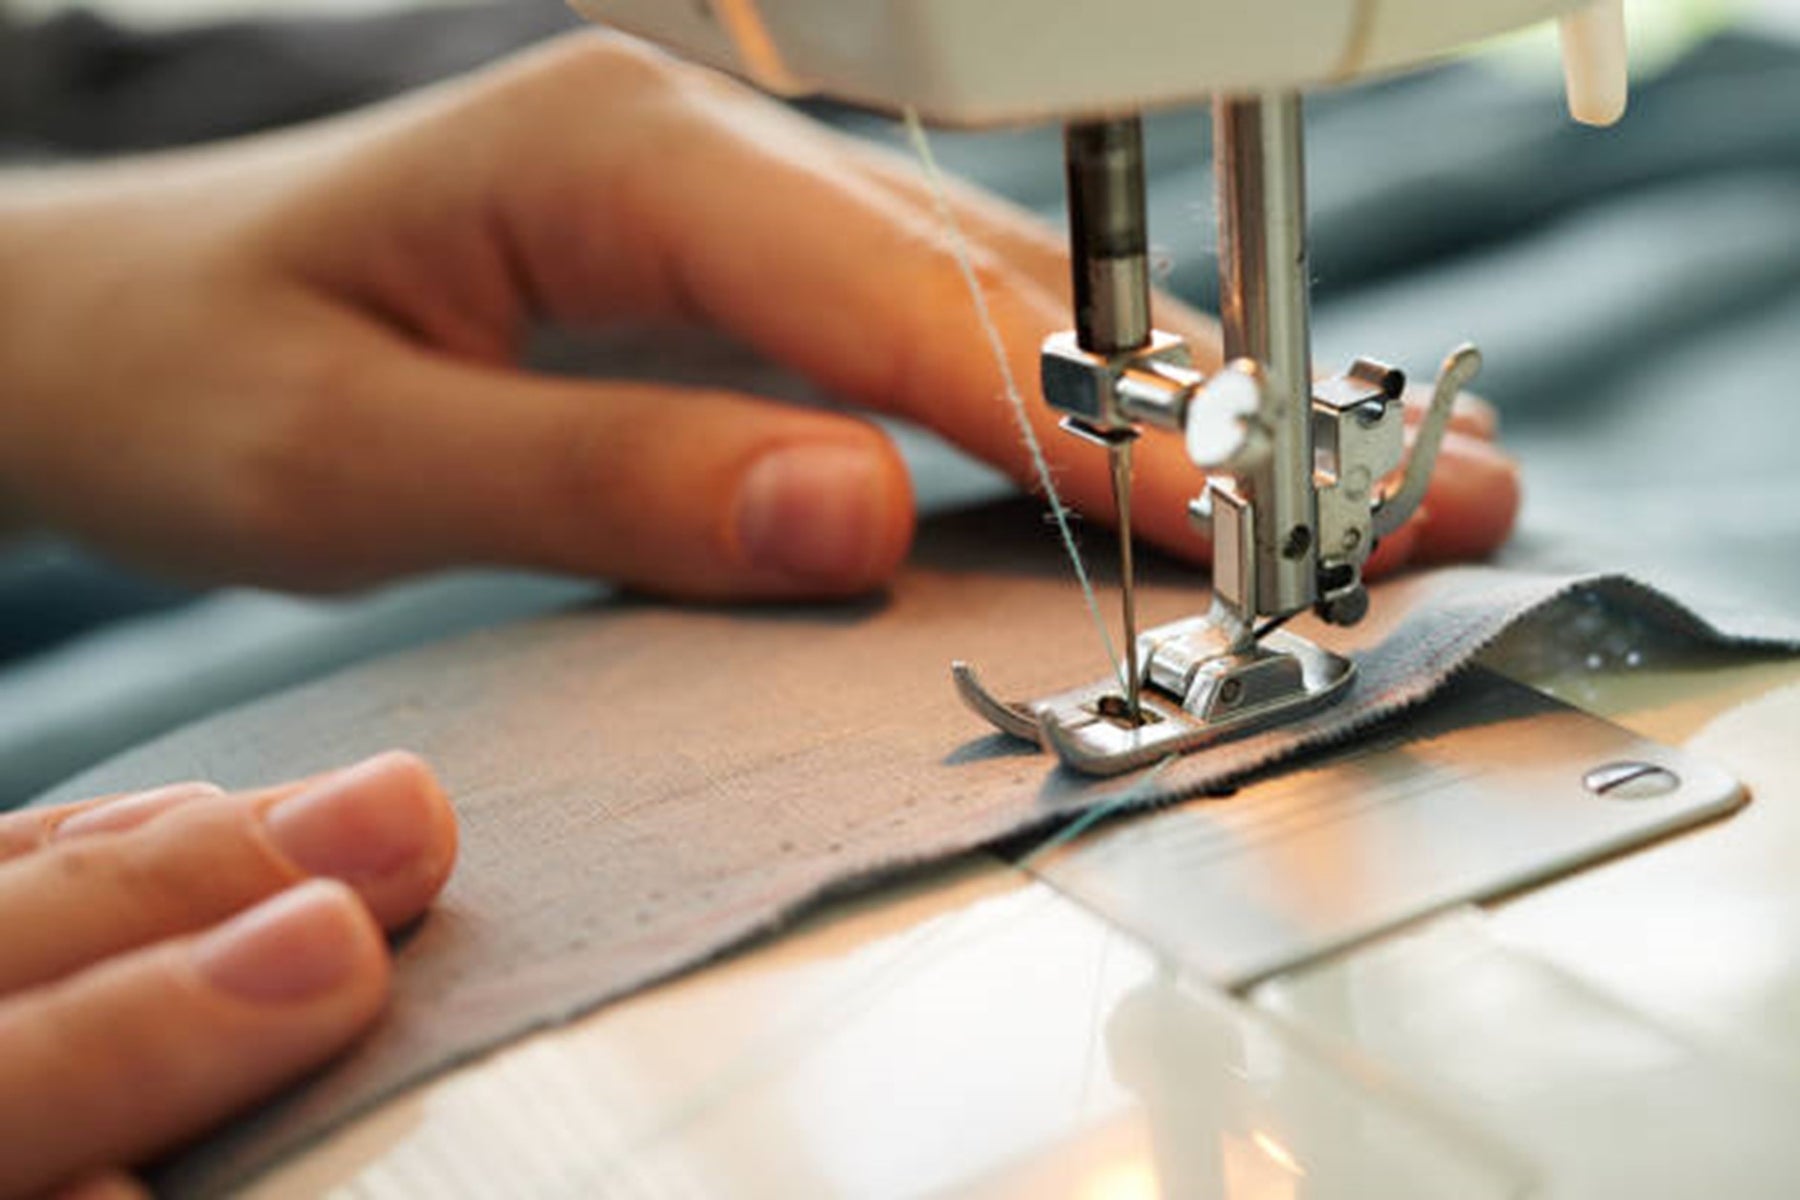 Stitching according to your requirement